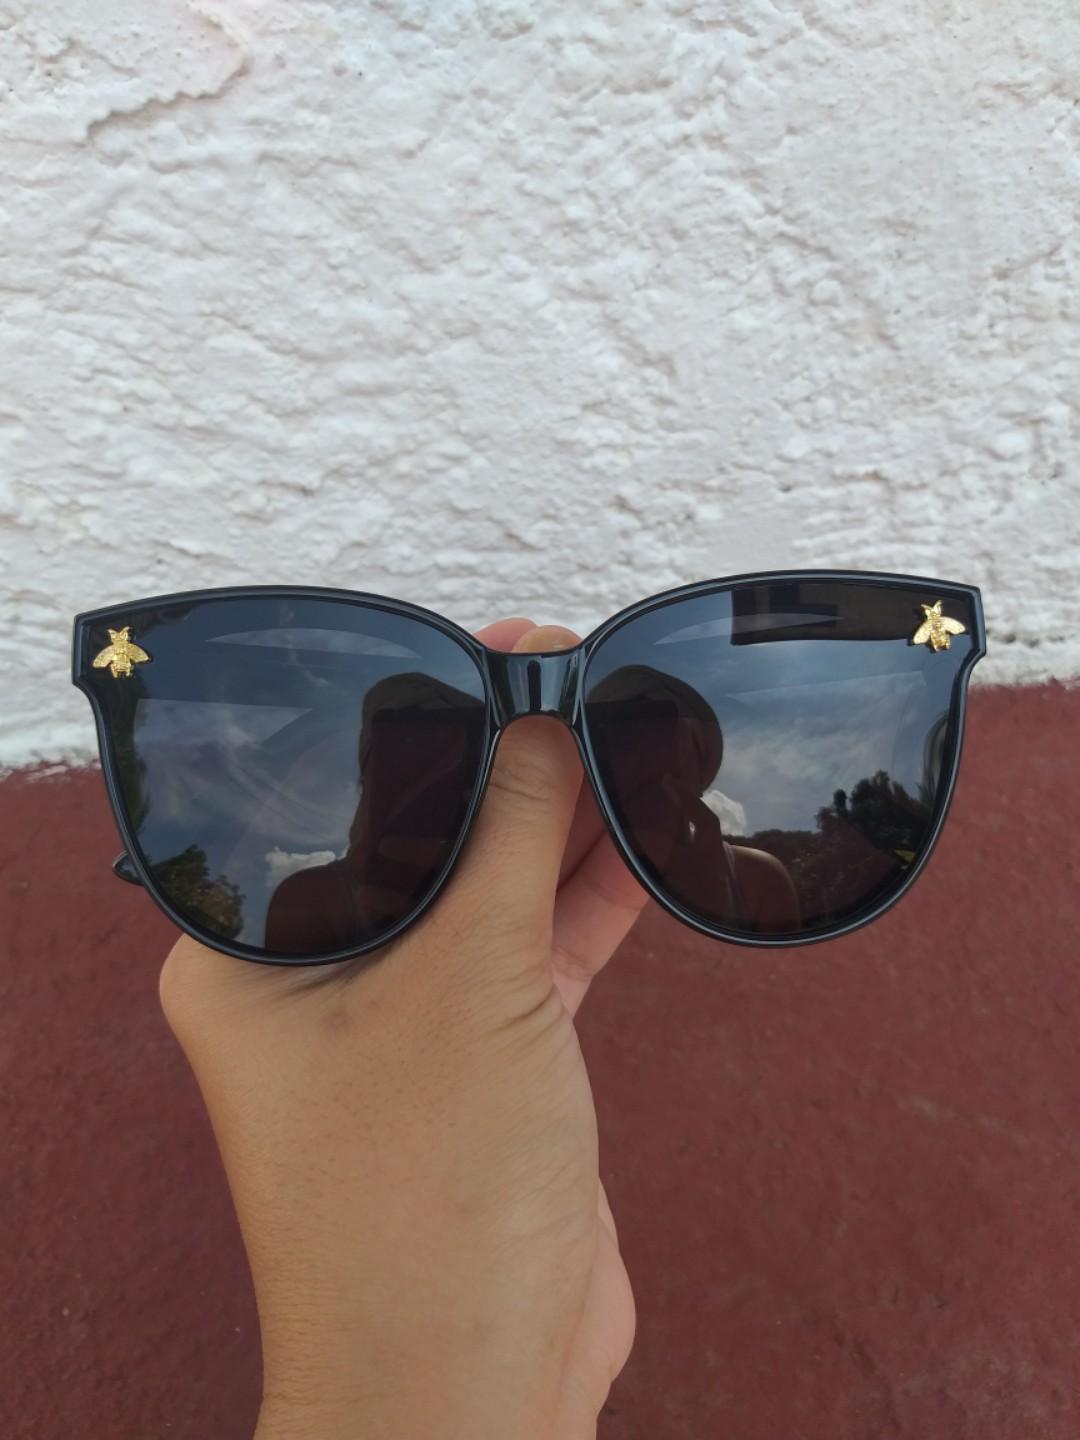 gucci sunglasses with bee on side